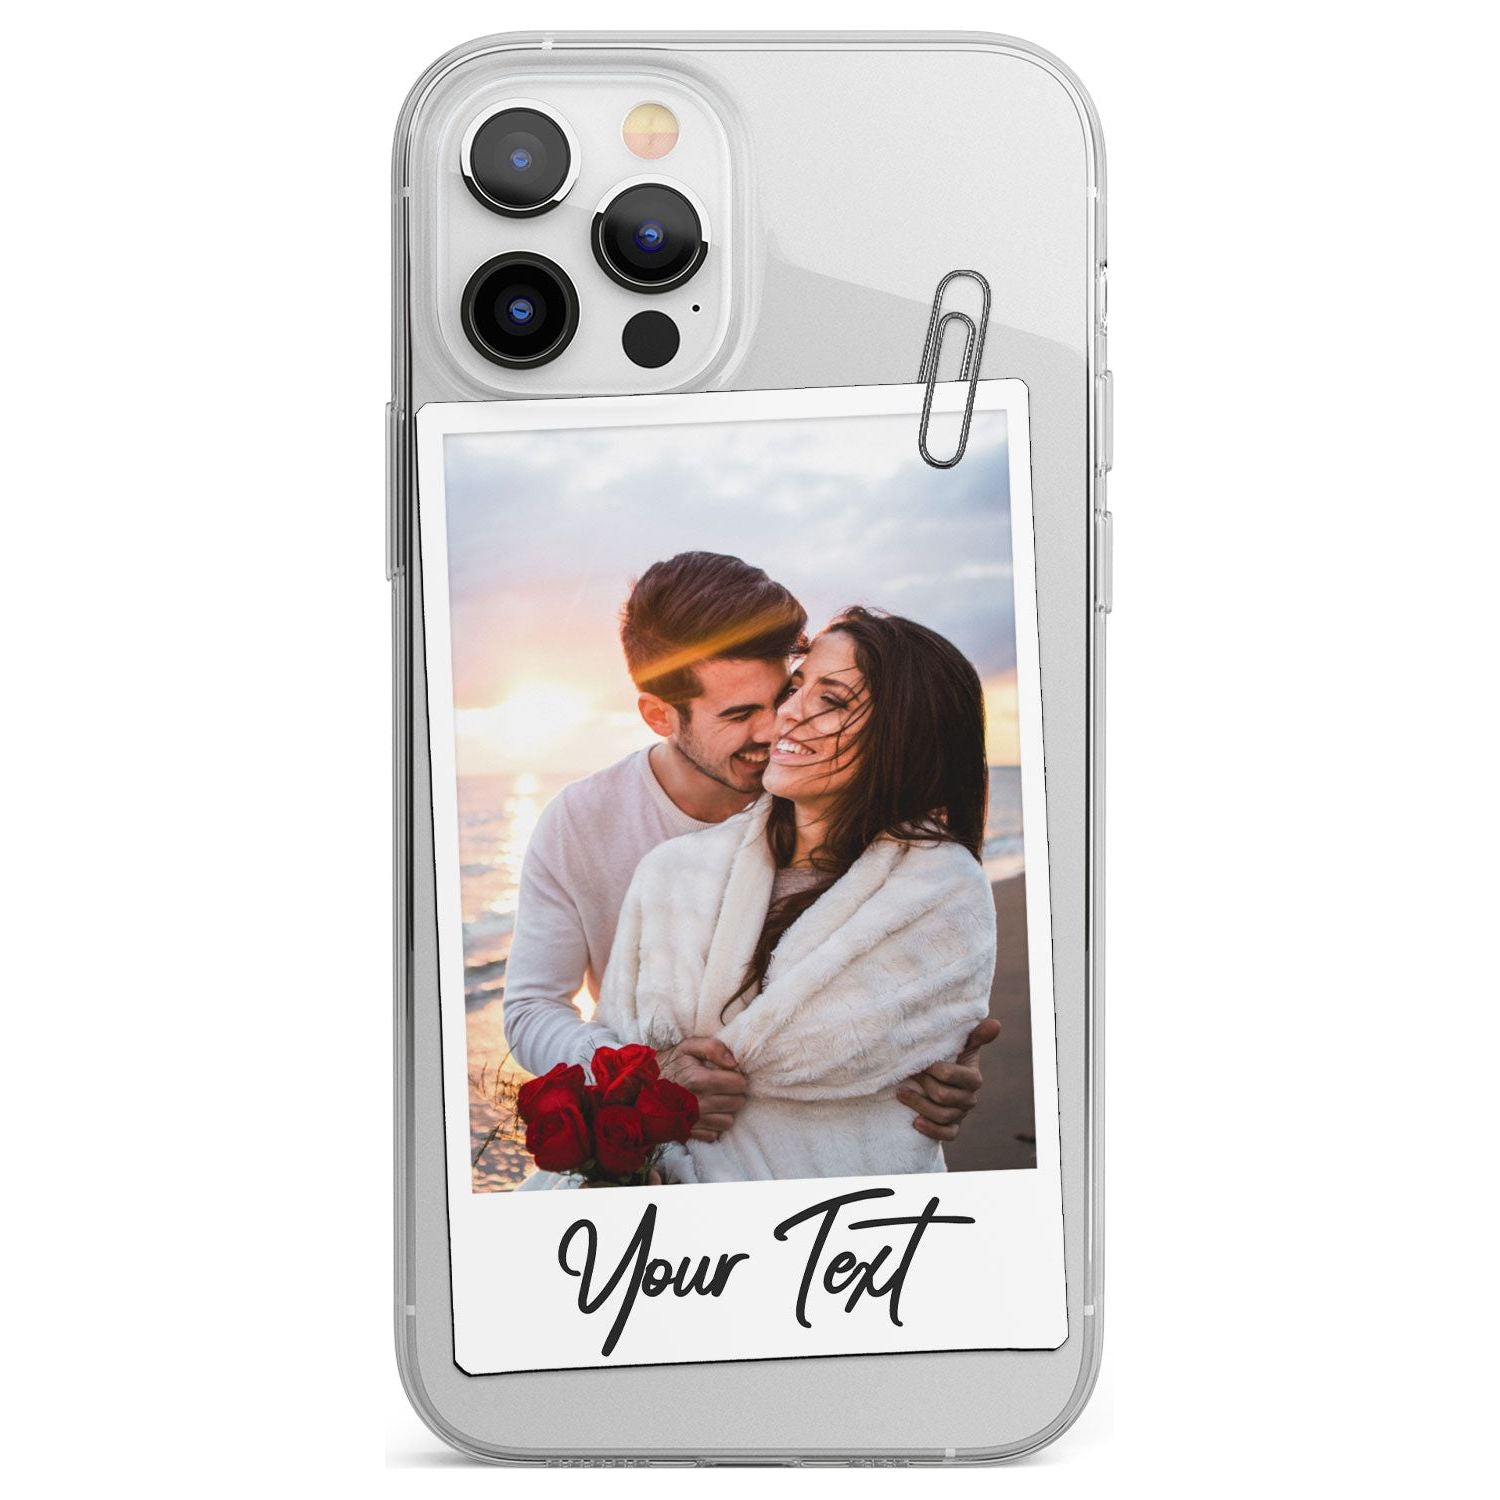 Personalised Vinyl Record Phone Case for iPhone 12 Pro